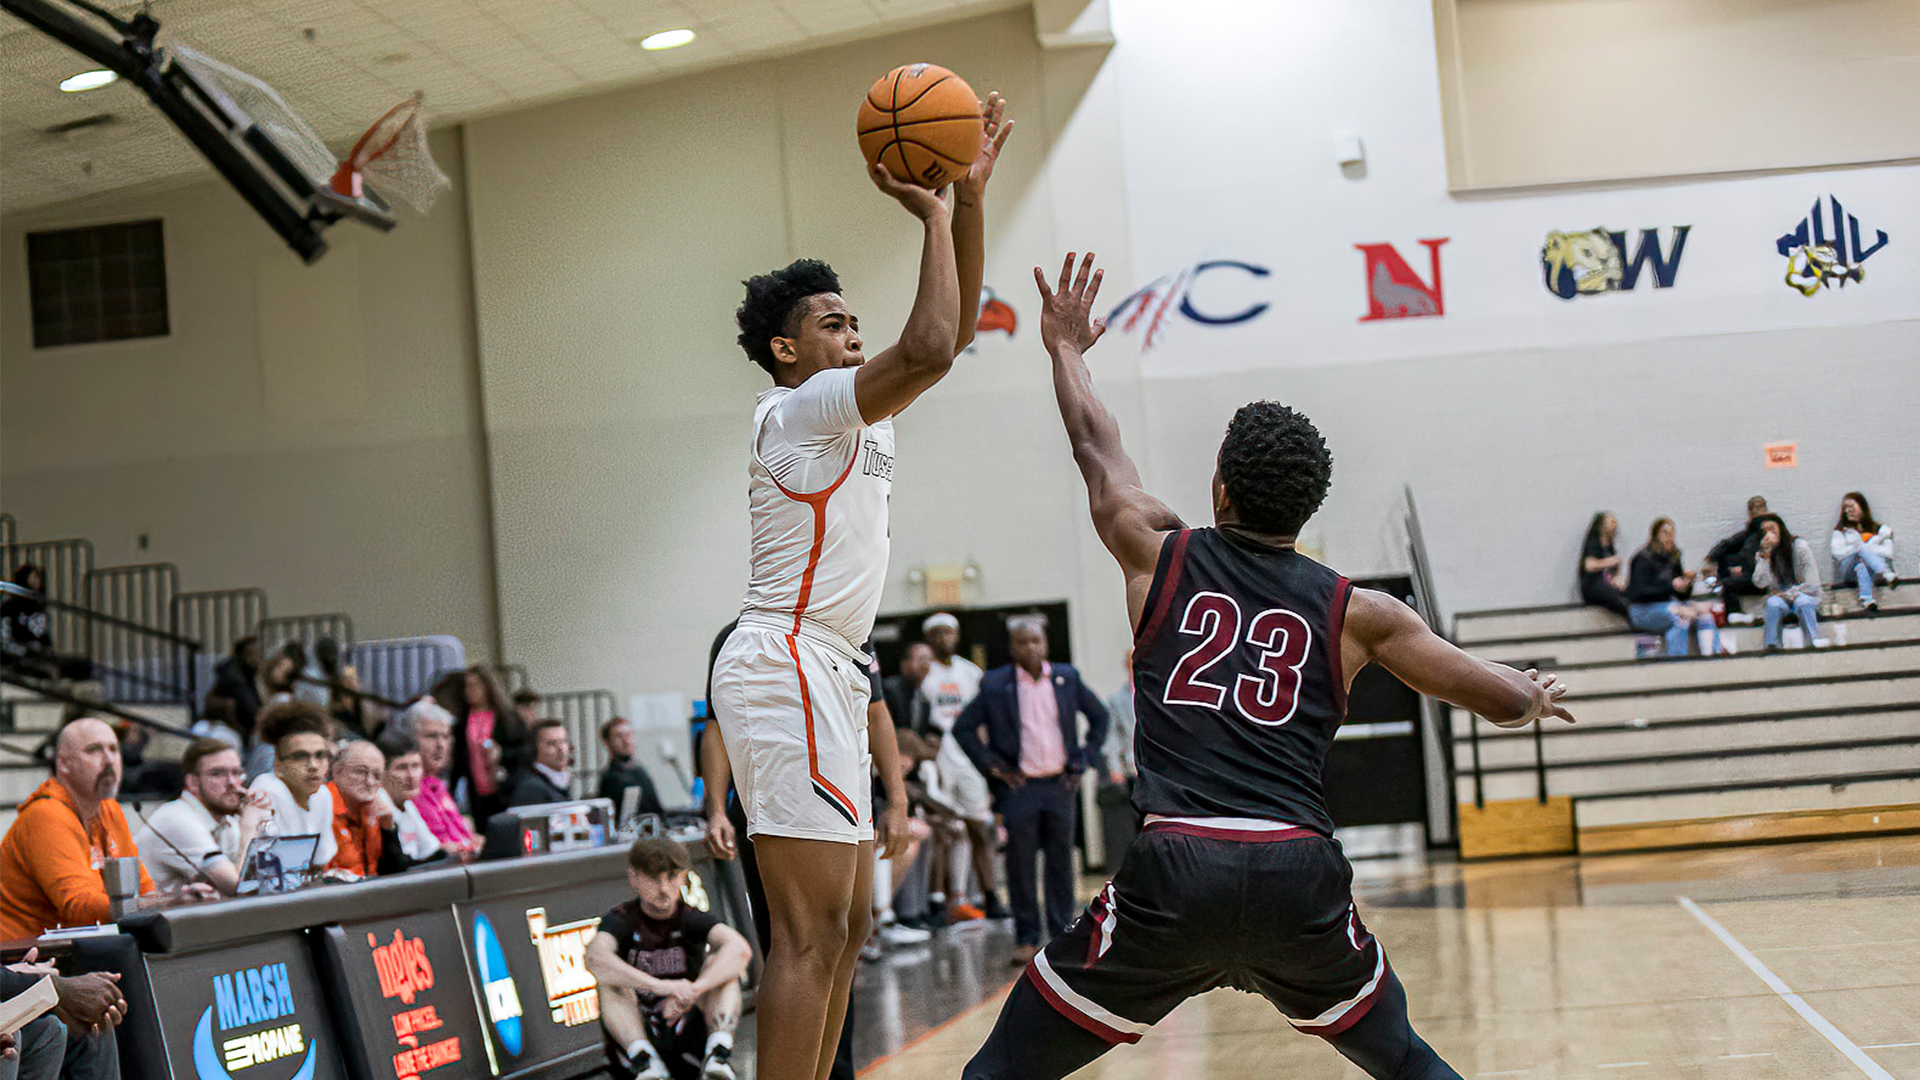 Kobe Funderburk scores a career-high 21 points in Tusculum's 85-78 win over Lenoir-Rhyne (photo by Chuck Williams)